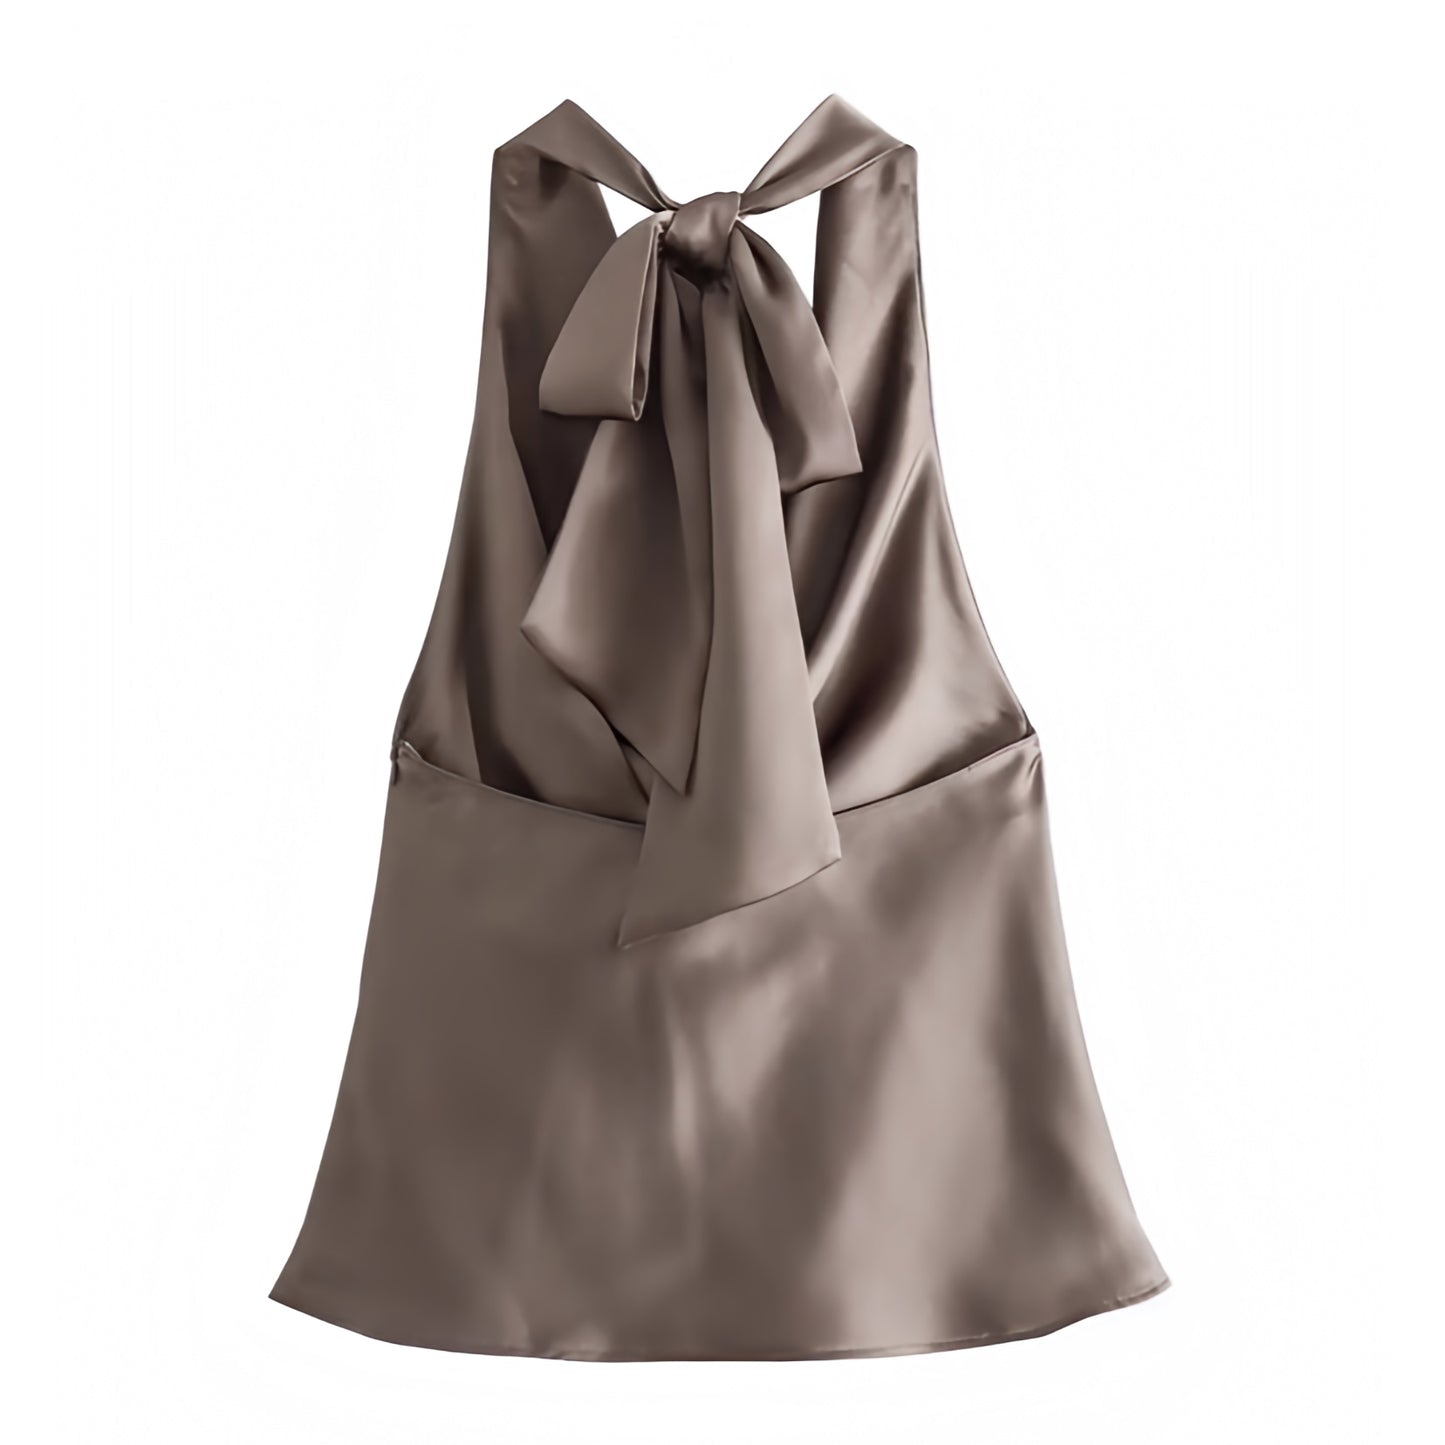 light-brown-khaki-satin-silk-draped-ruched-scoop-neck-slim-fit-backless-open-back-cut-out-sleeveless-halter-crop-camisole-tank-top-blouse-women-ladies-chic-trendy-spring-2024-summer-elegant-casual-semi-formal-classy-feminine-party-date-night-out-sexy-club-wear-90s-minimalist-office-siren-style-zara-revolve-aritzia-white-fox-princess-polly-babyboo-iamgia-edikted-fenity